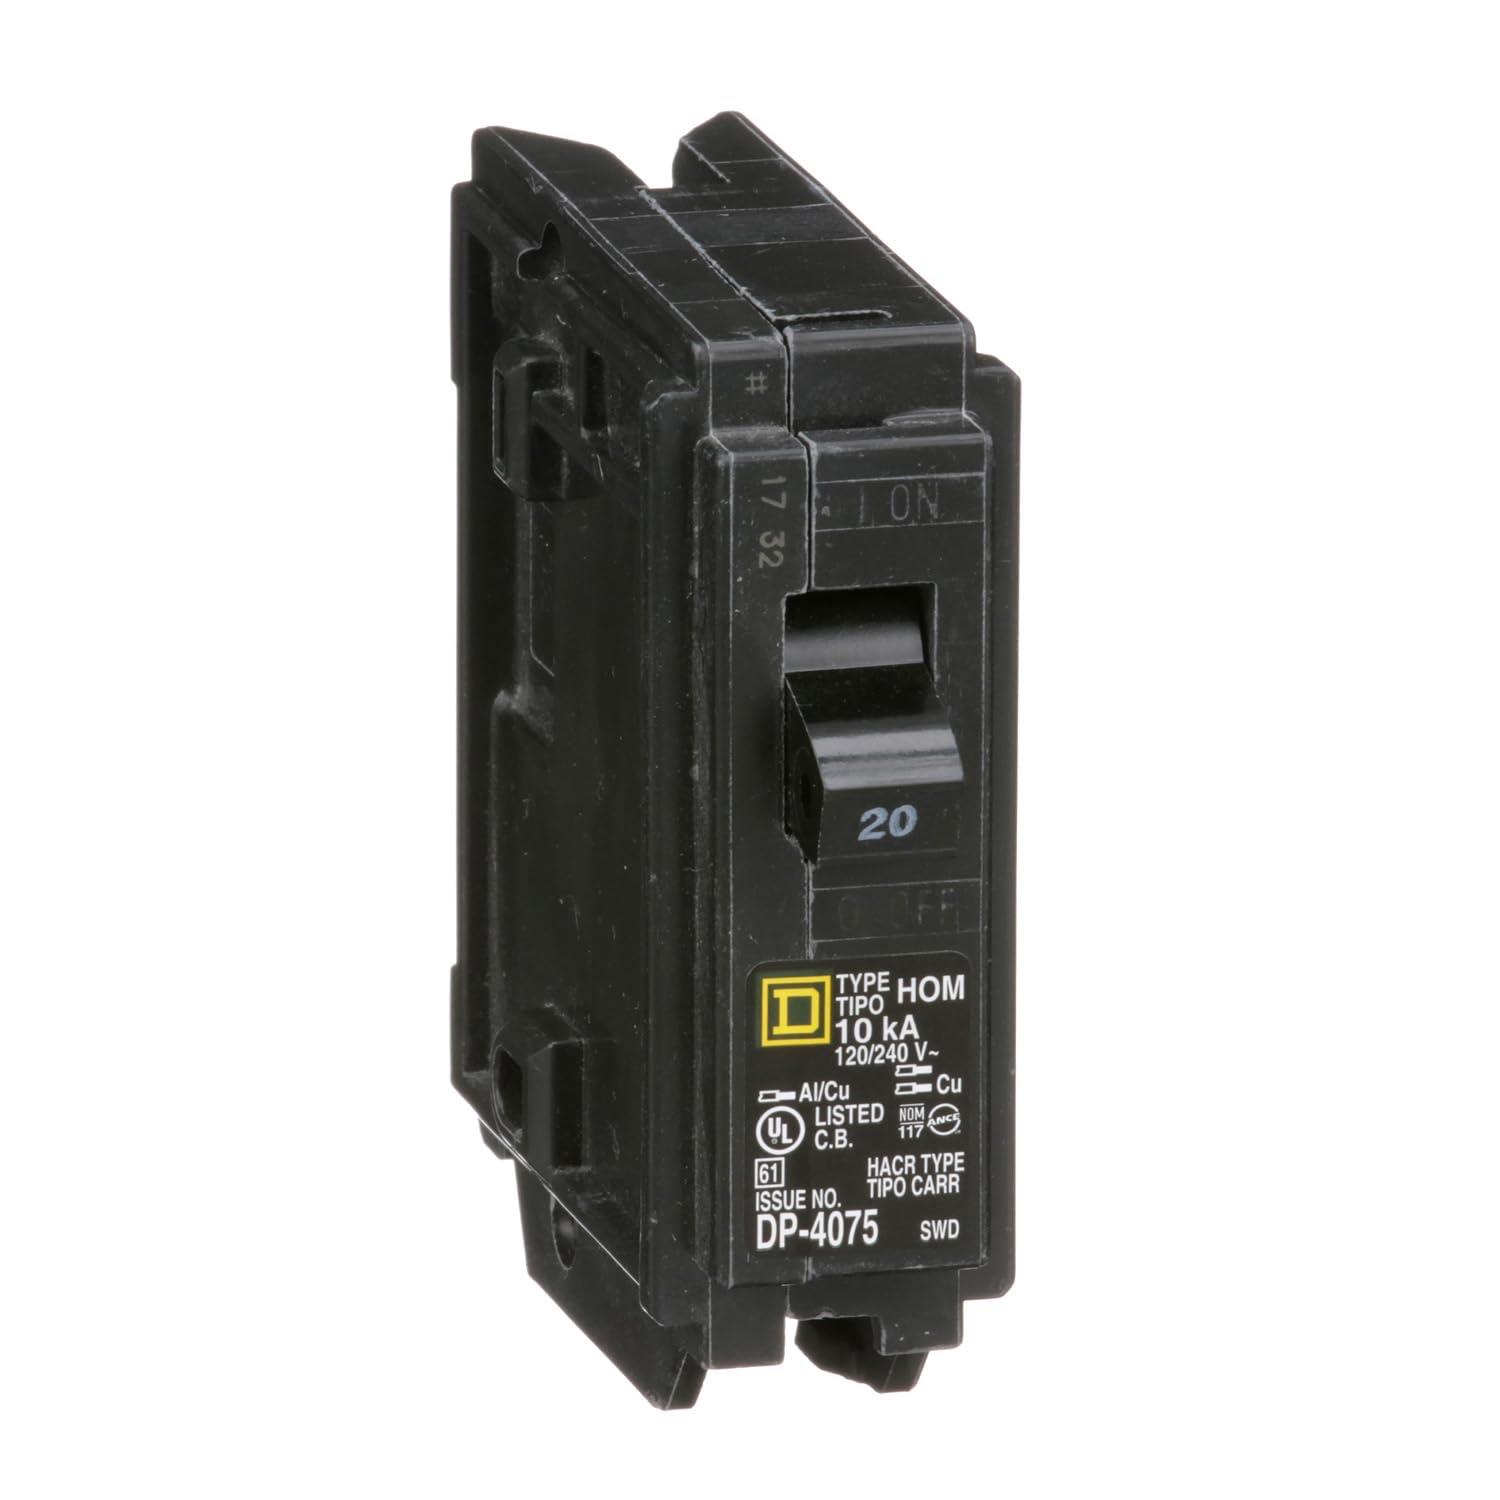 The Square D 20 Amp Single-Pole Circuit Breaker on a white background.